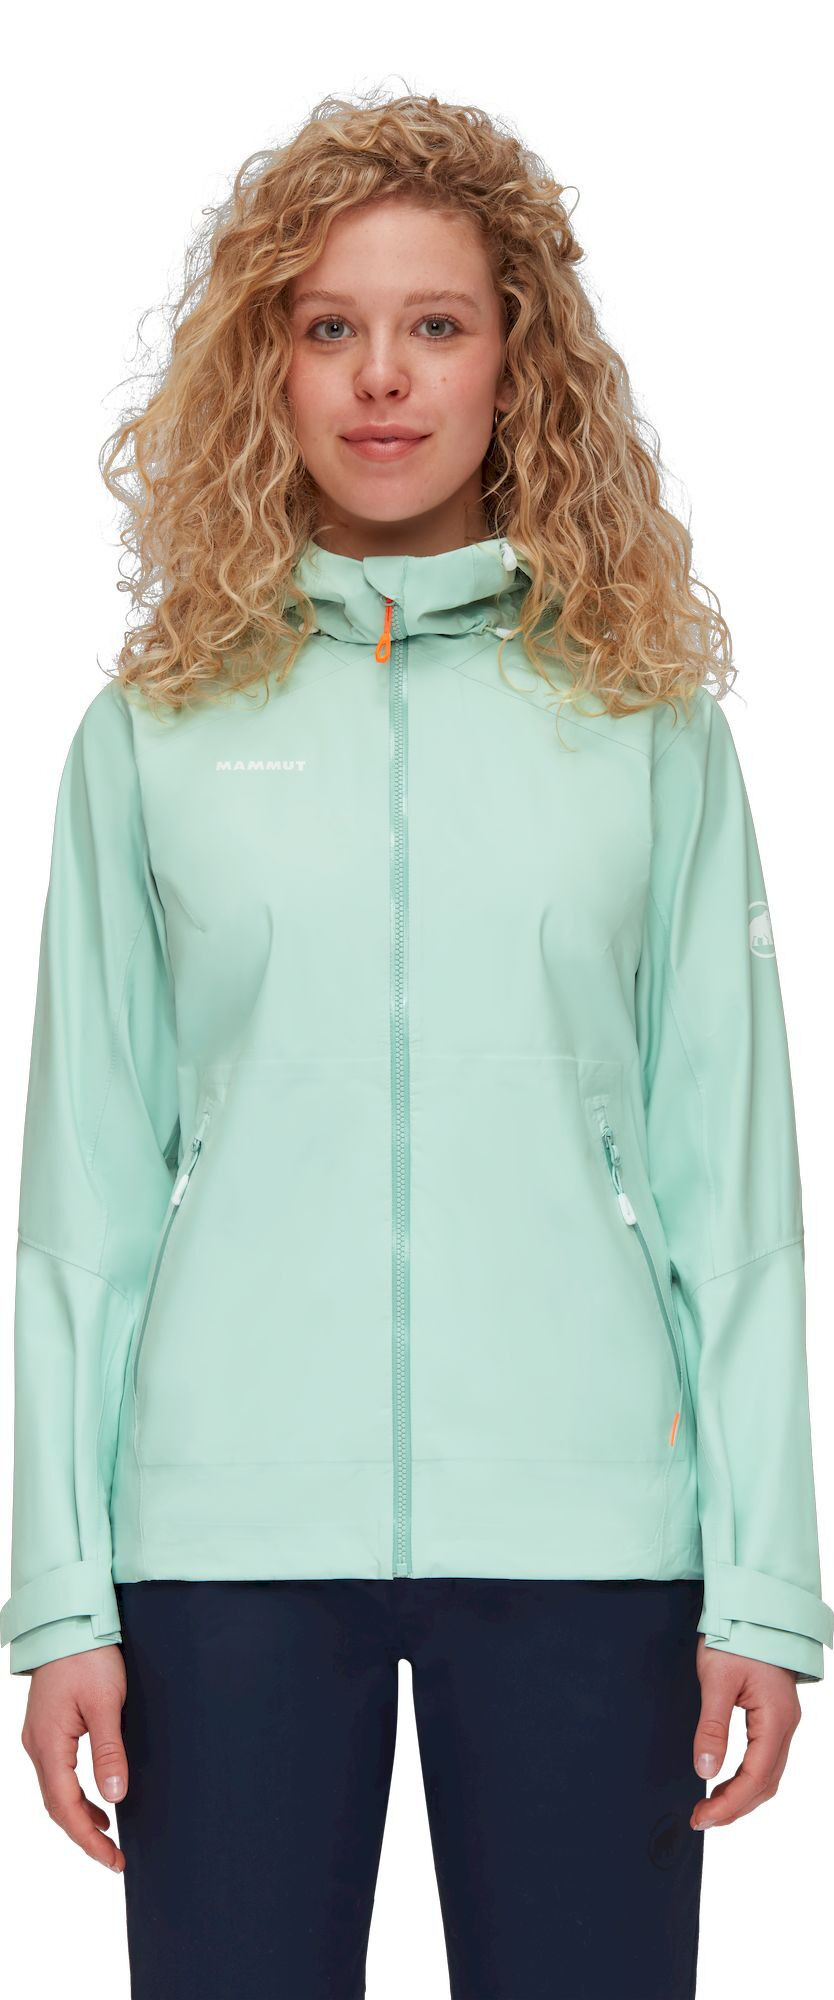 Mammut Convey Tour HS Hooded Jacket - Giacca antipioggia - Donna | Hardloop